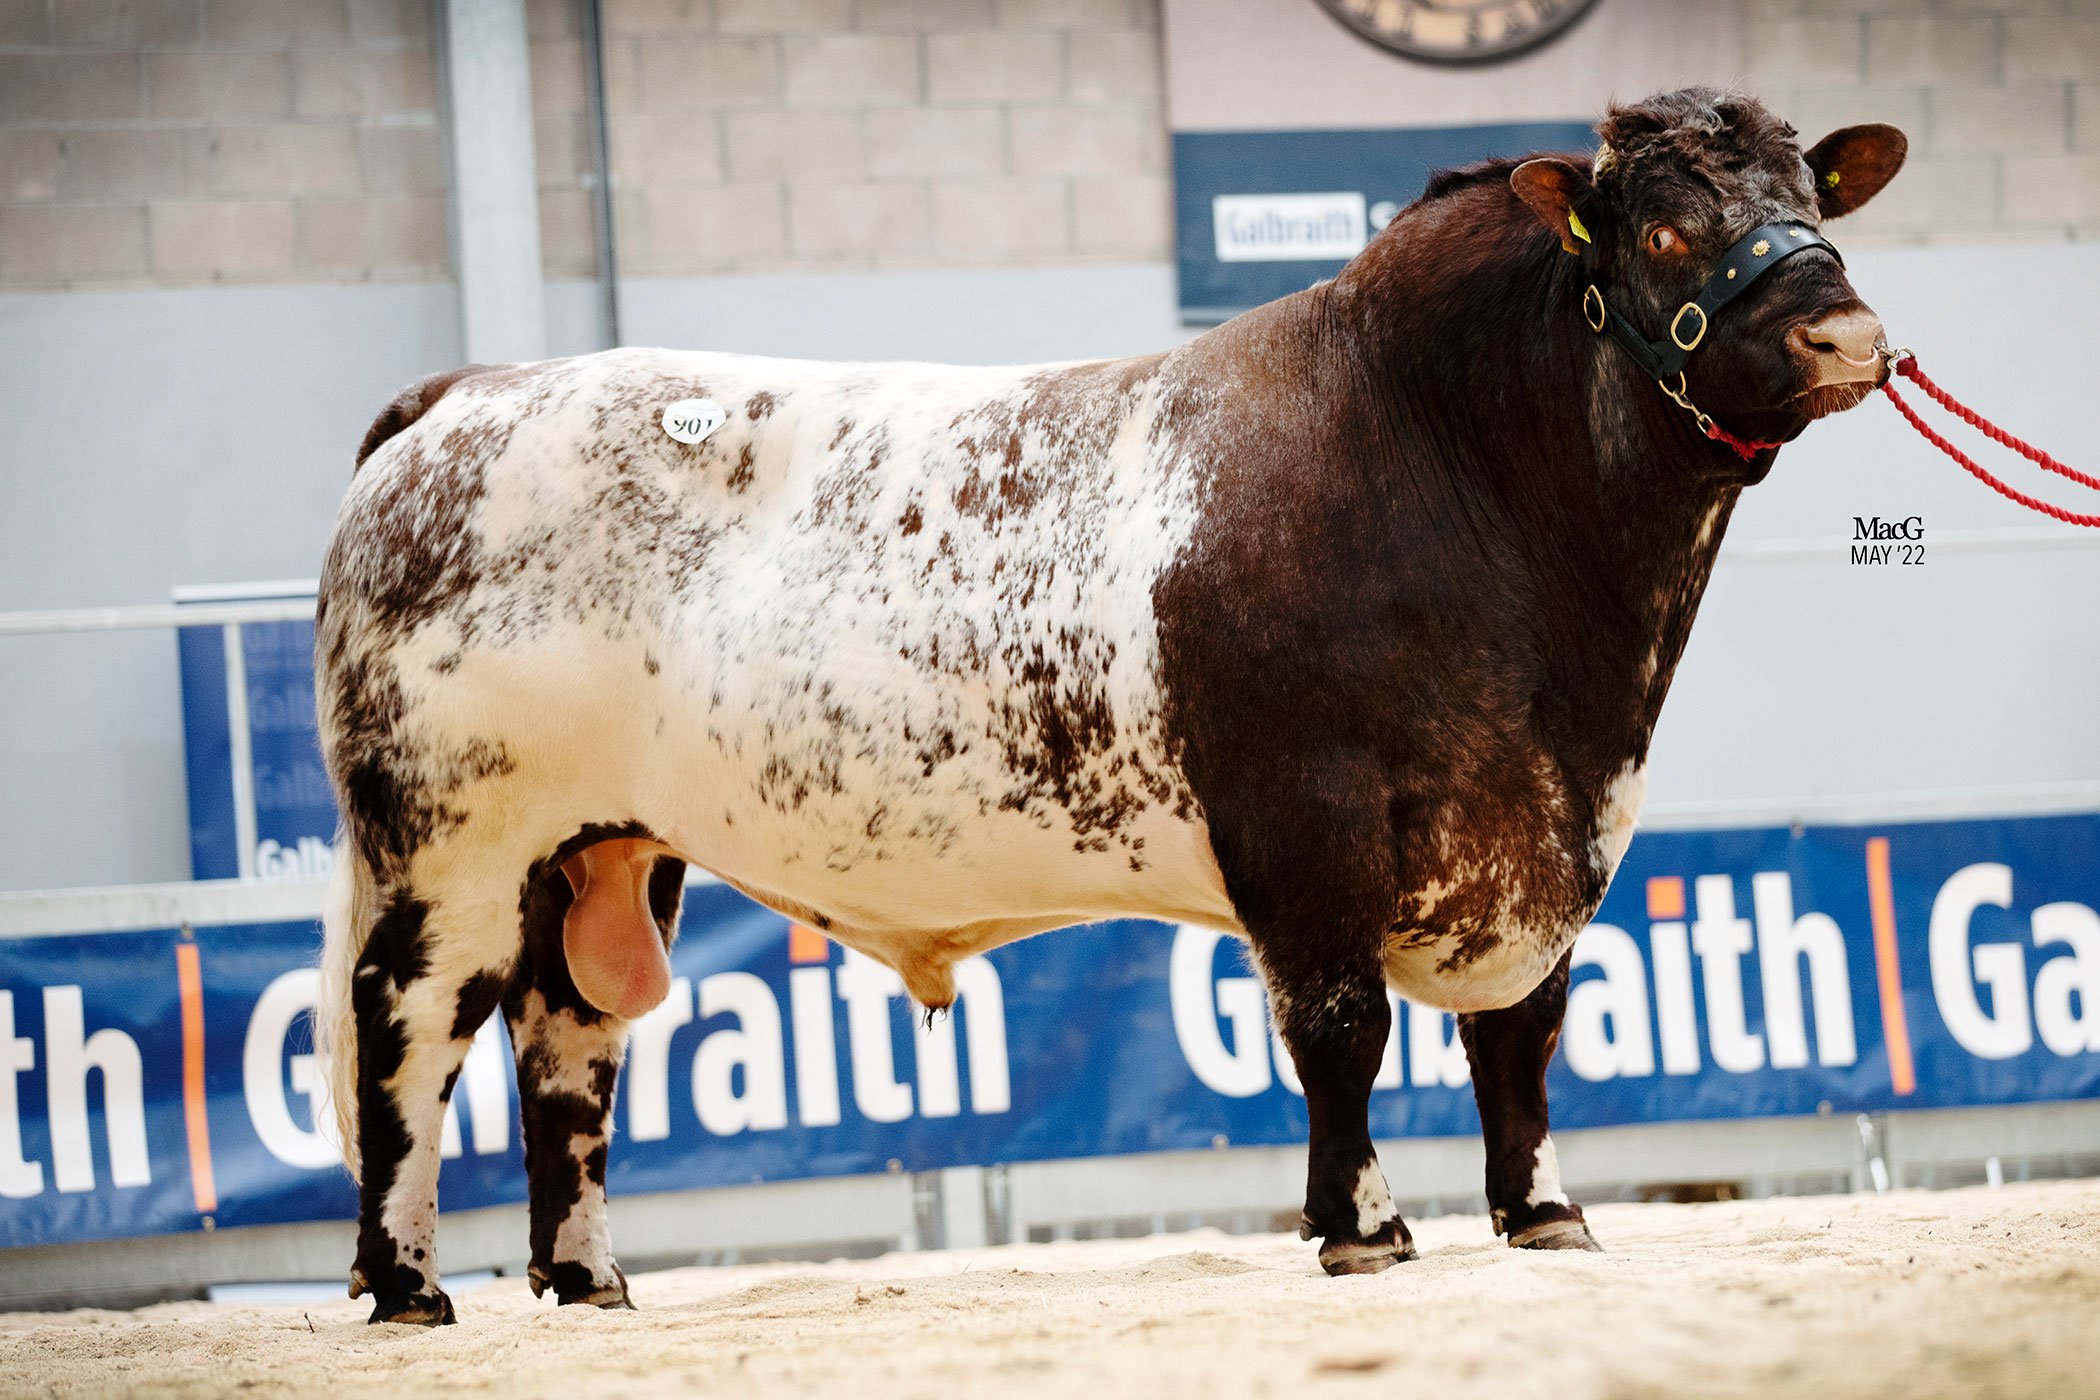 Eastmill Laird sold for 6,000 gns